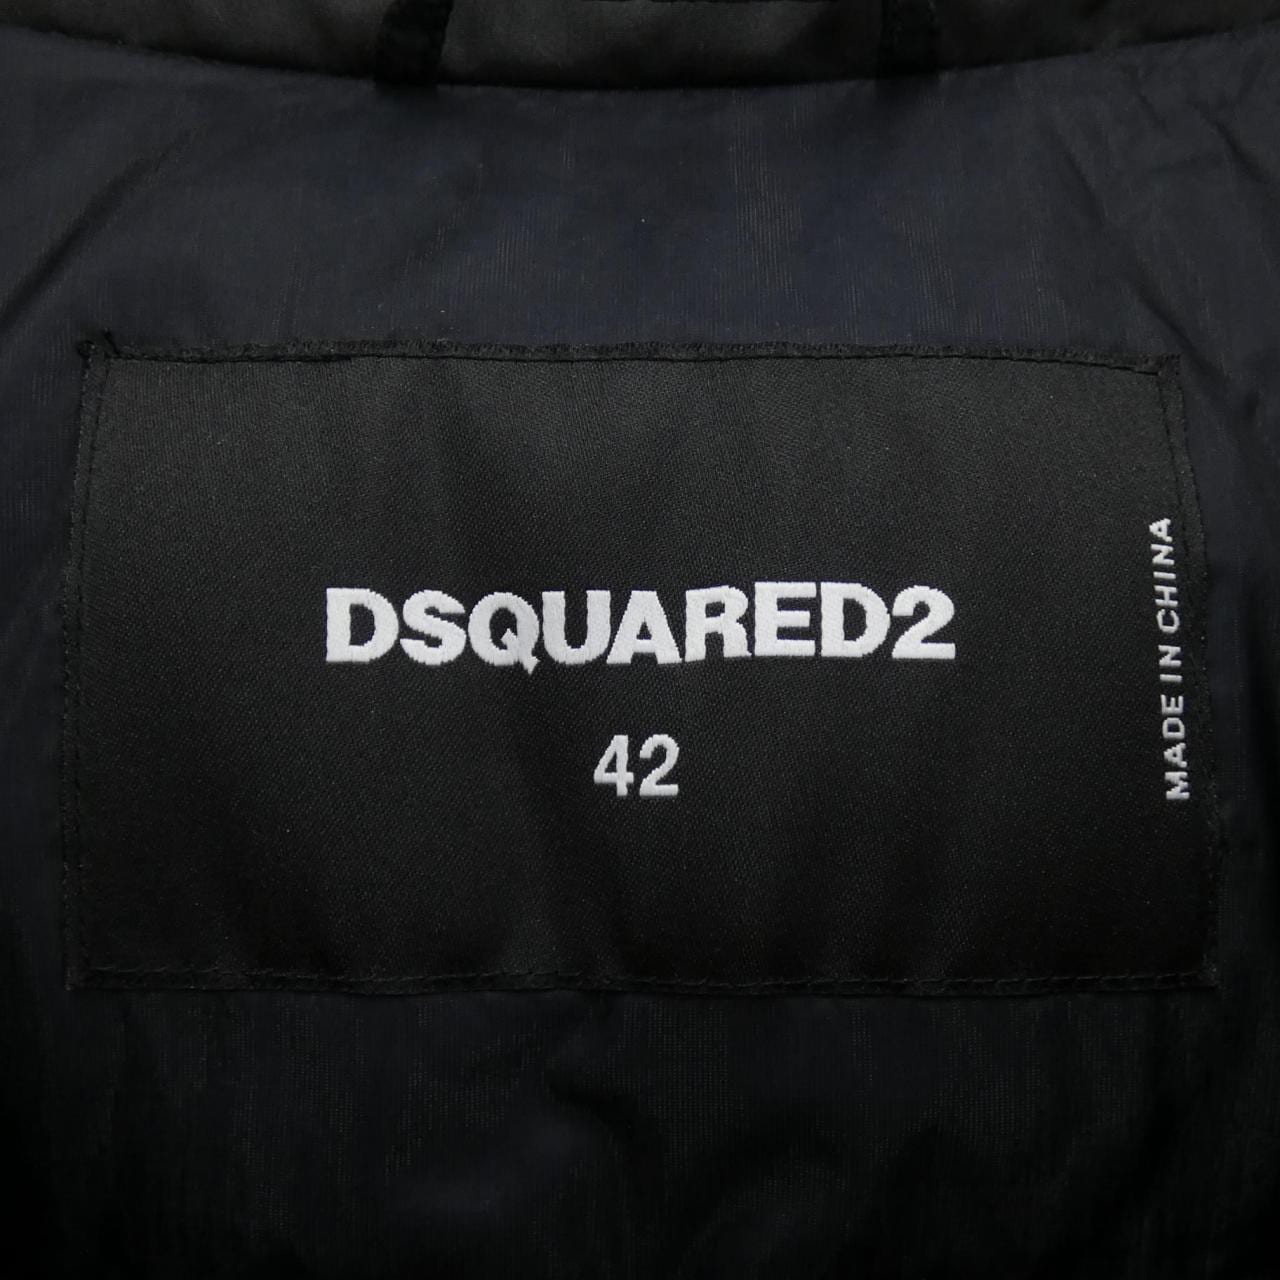 DSQUARED2 down jacket